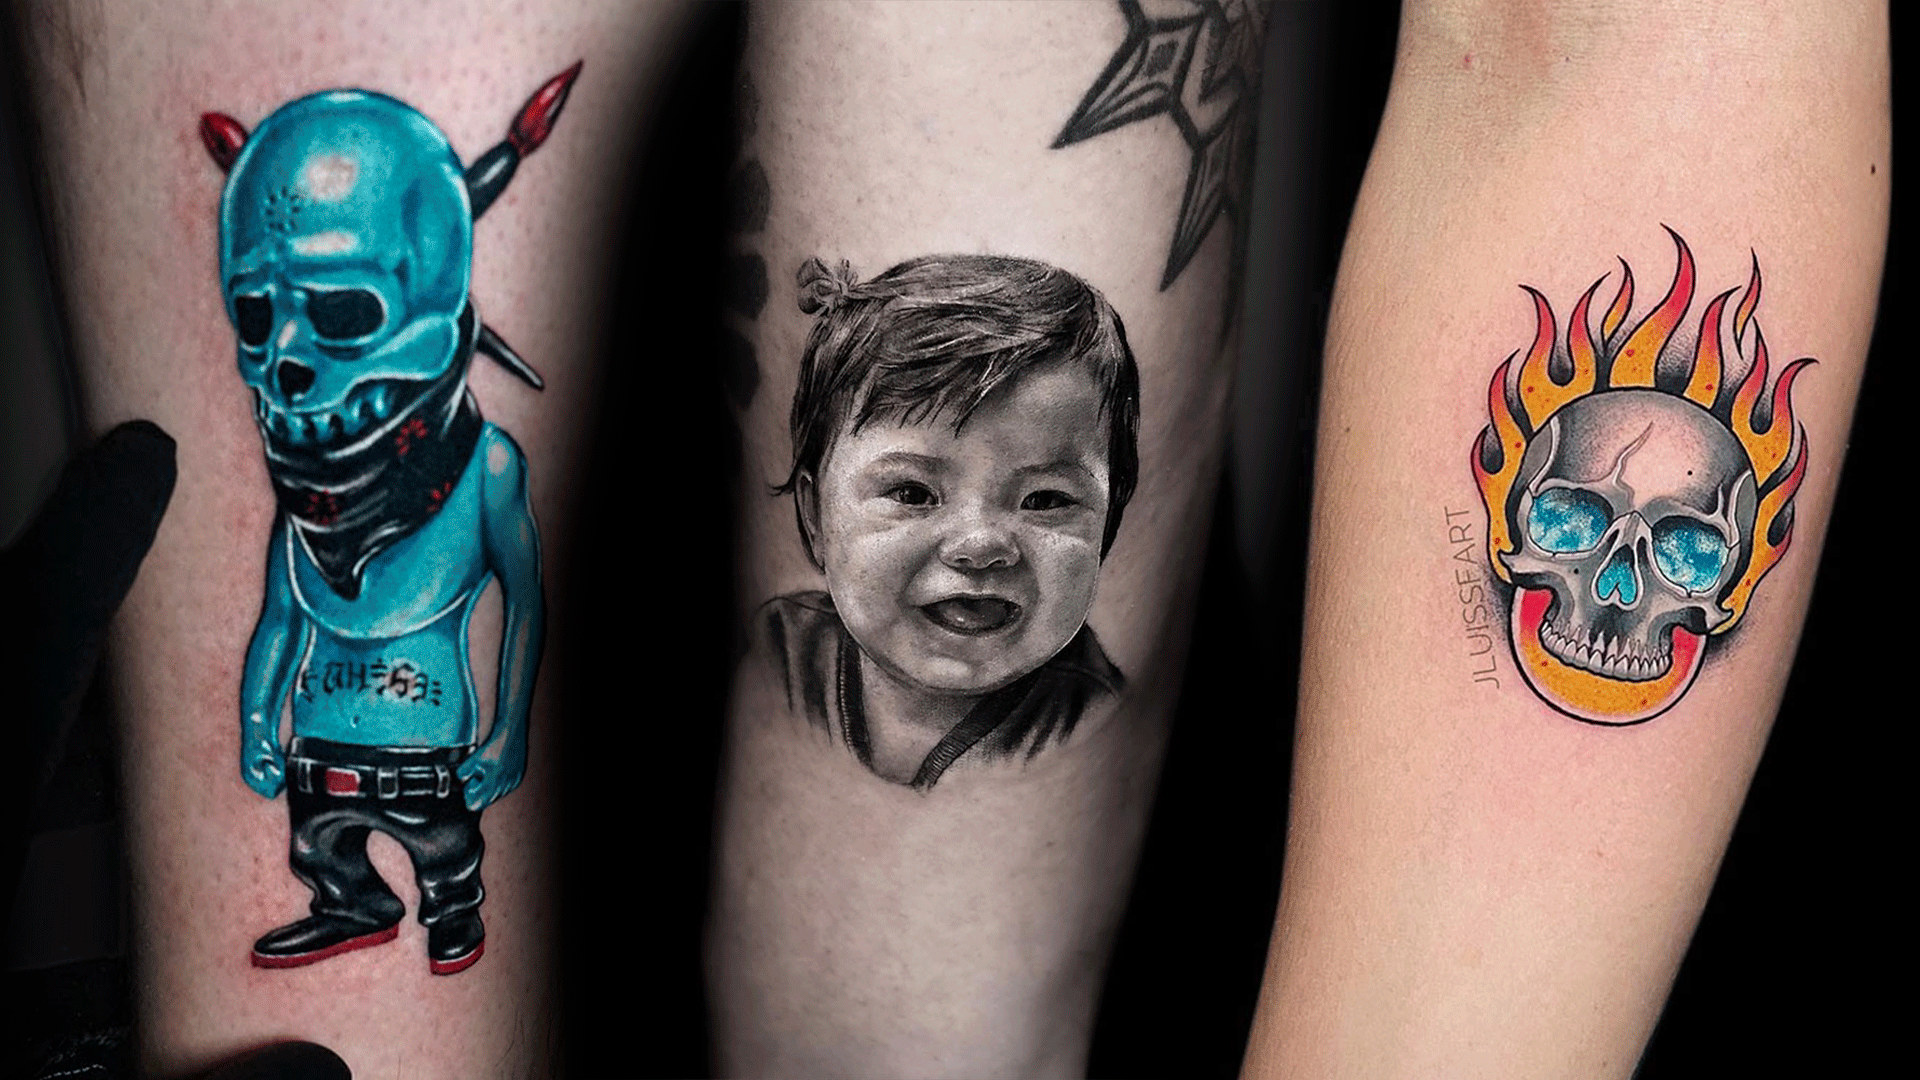 Looking to get inked? Check out these 12 great tattoo ideas